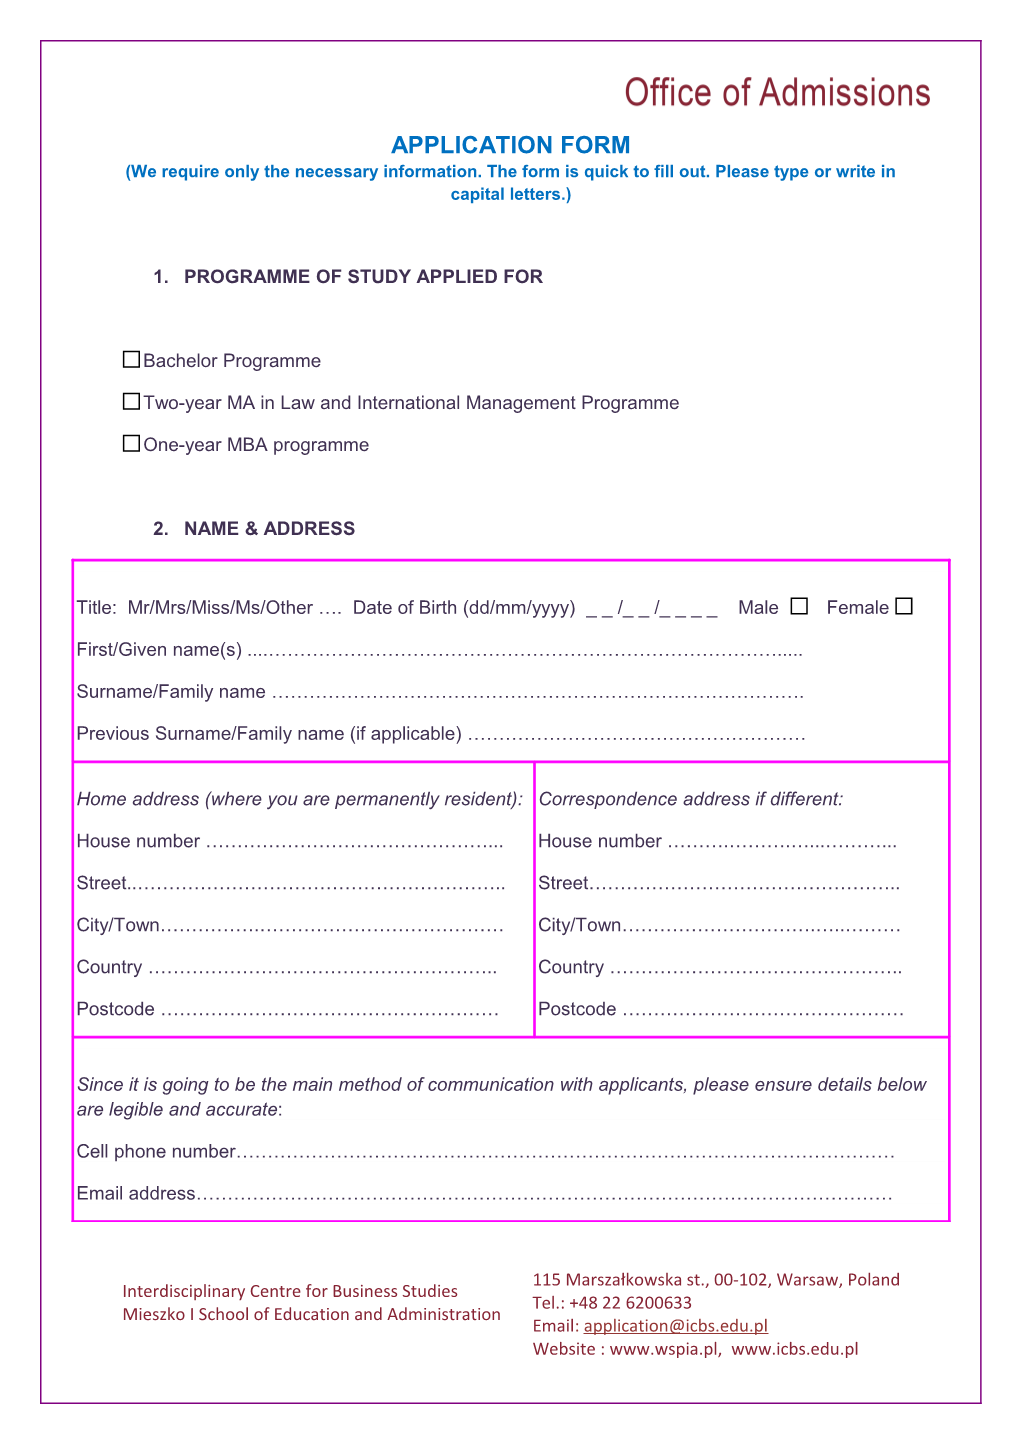 APPLICATION FORM (We Require Only the Necessary Information. the Form Is Quick to Fill